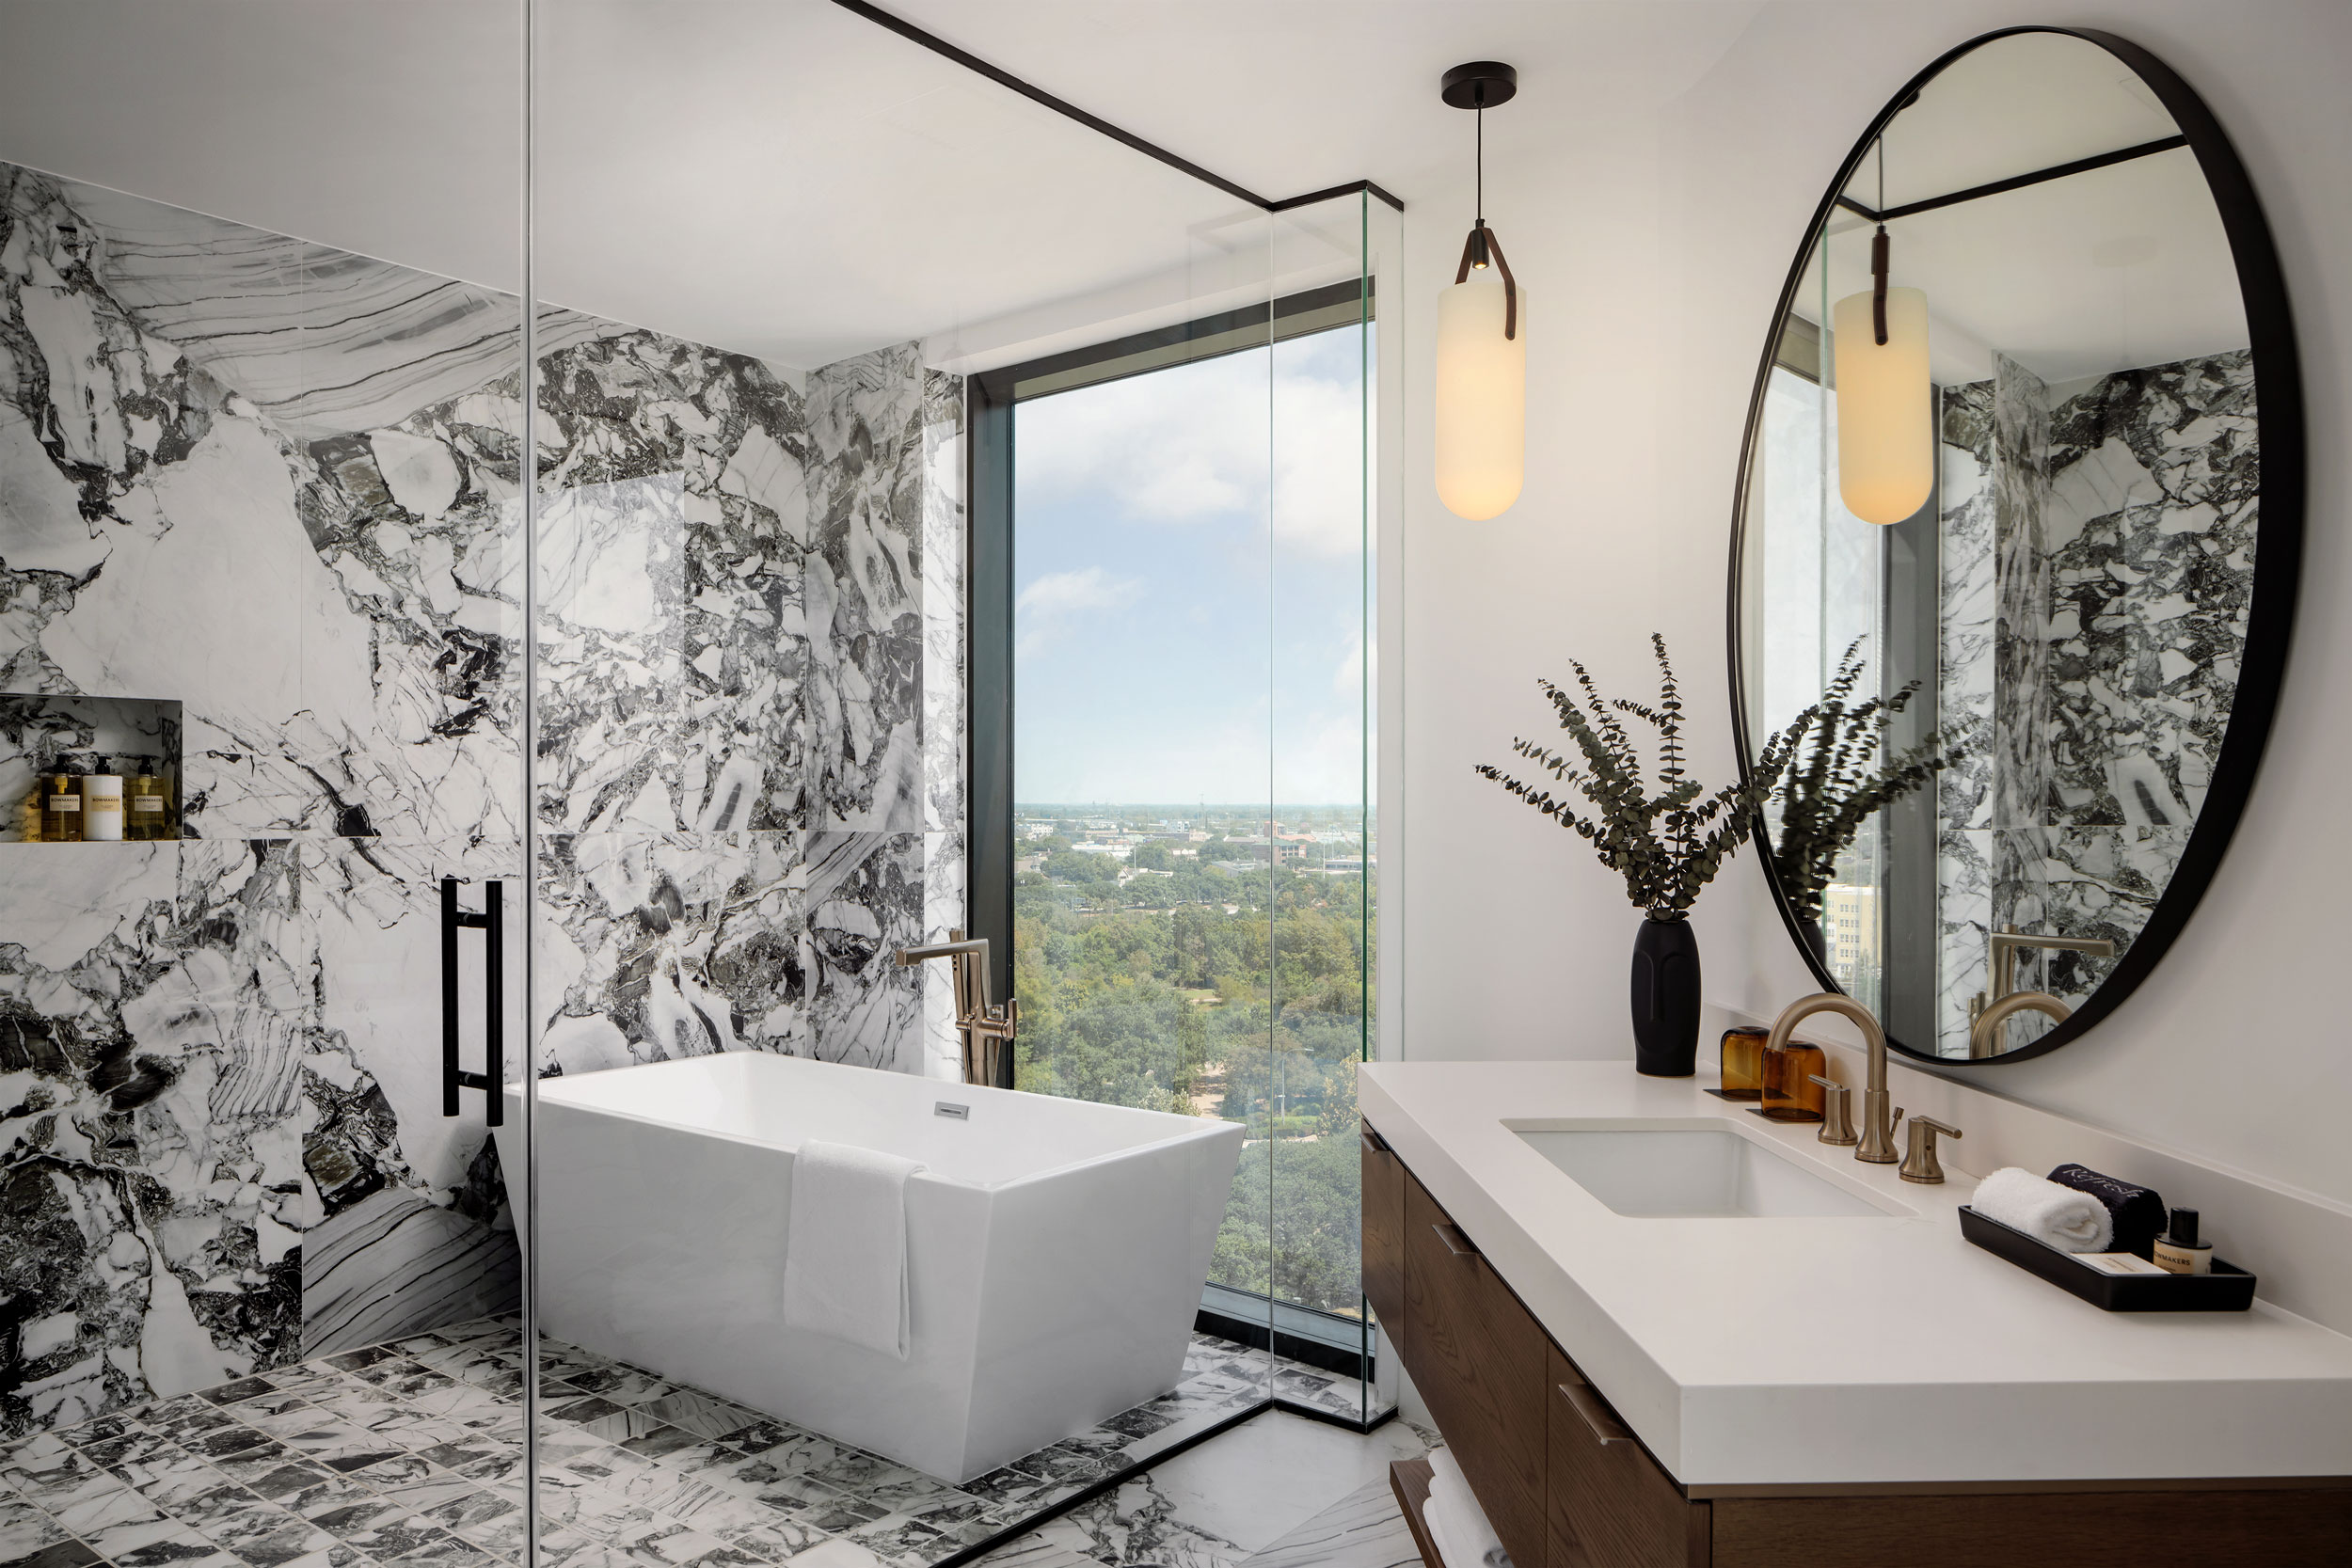 Large-format Porcelain Sintered Stone Shower Walls, Niche, and Flooring in Jade